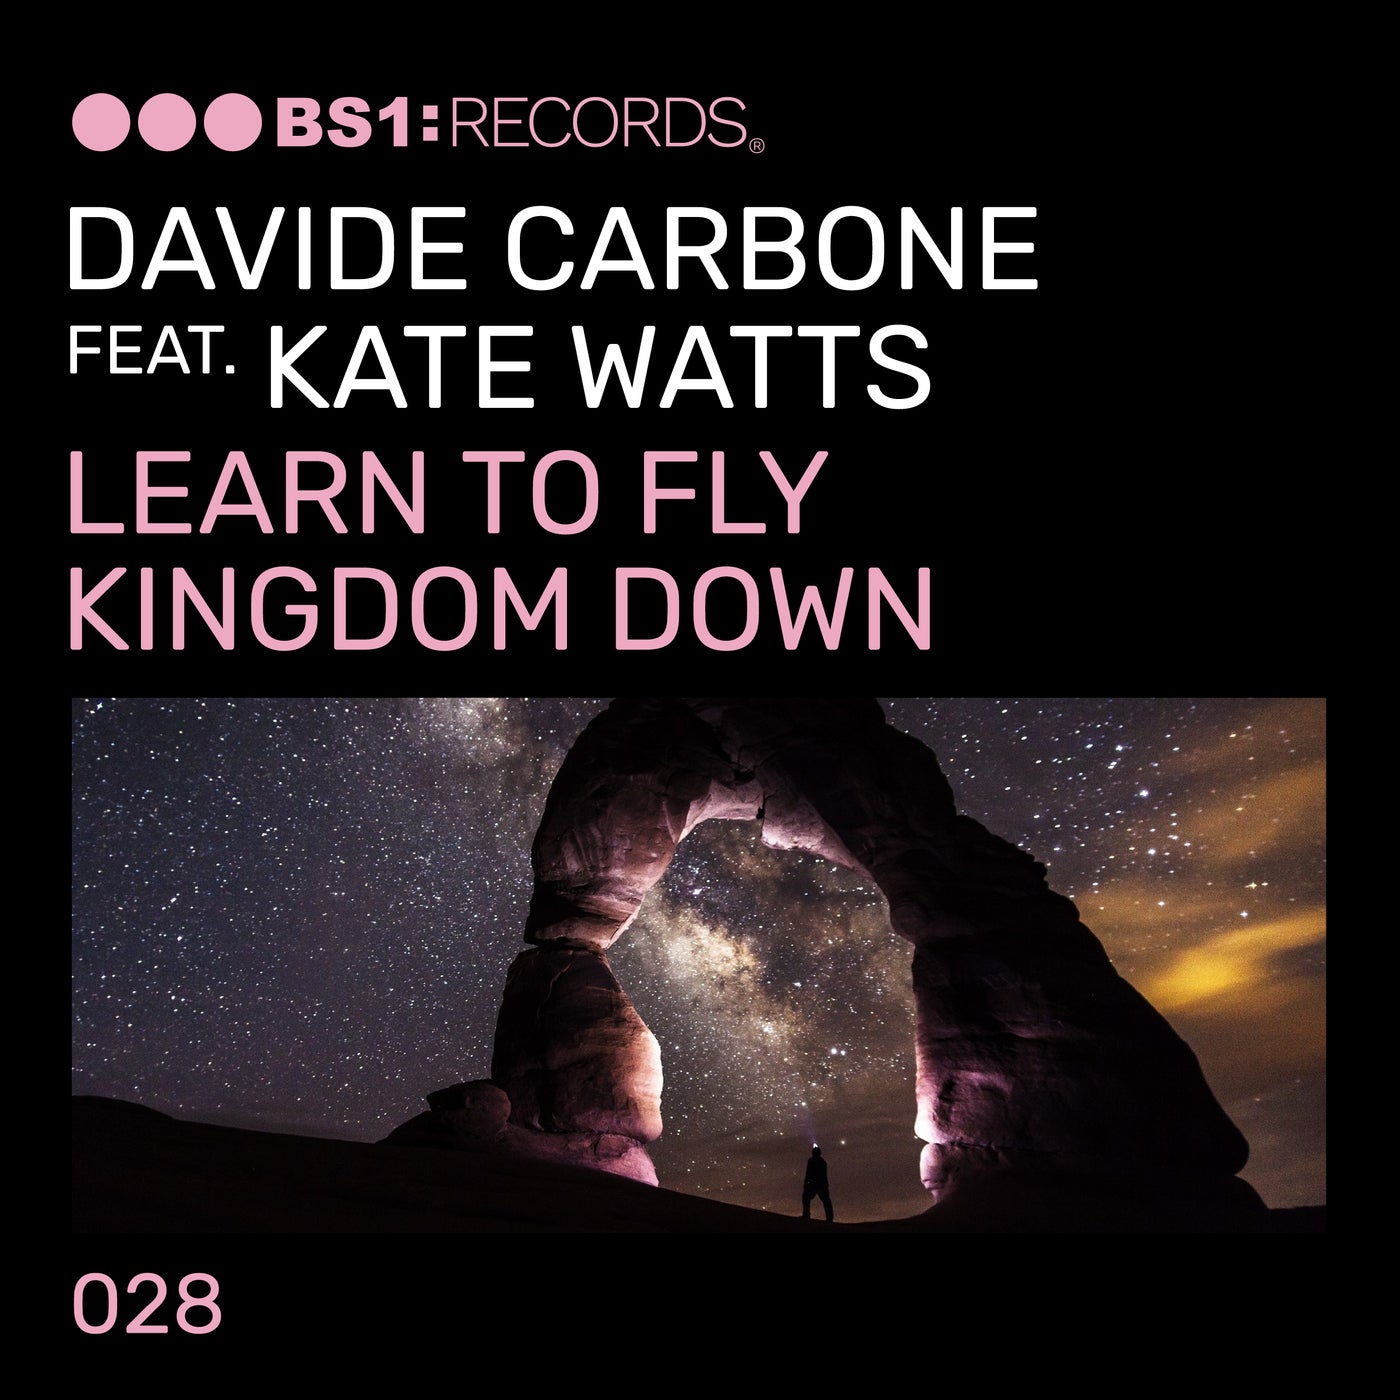 Learn to Fly / Kingdom Down